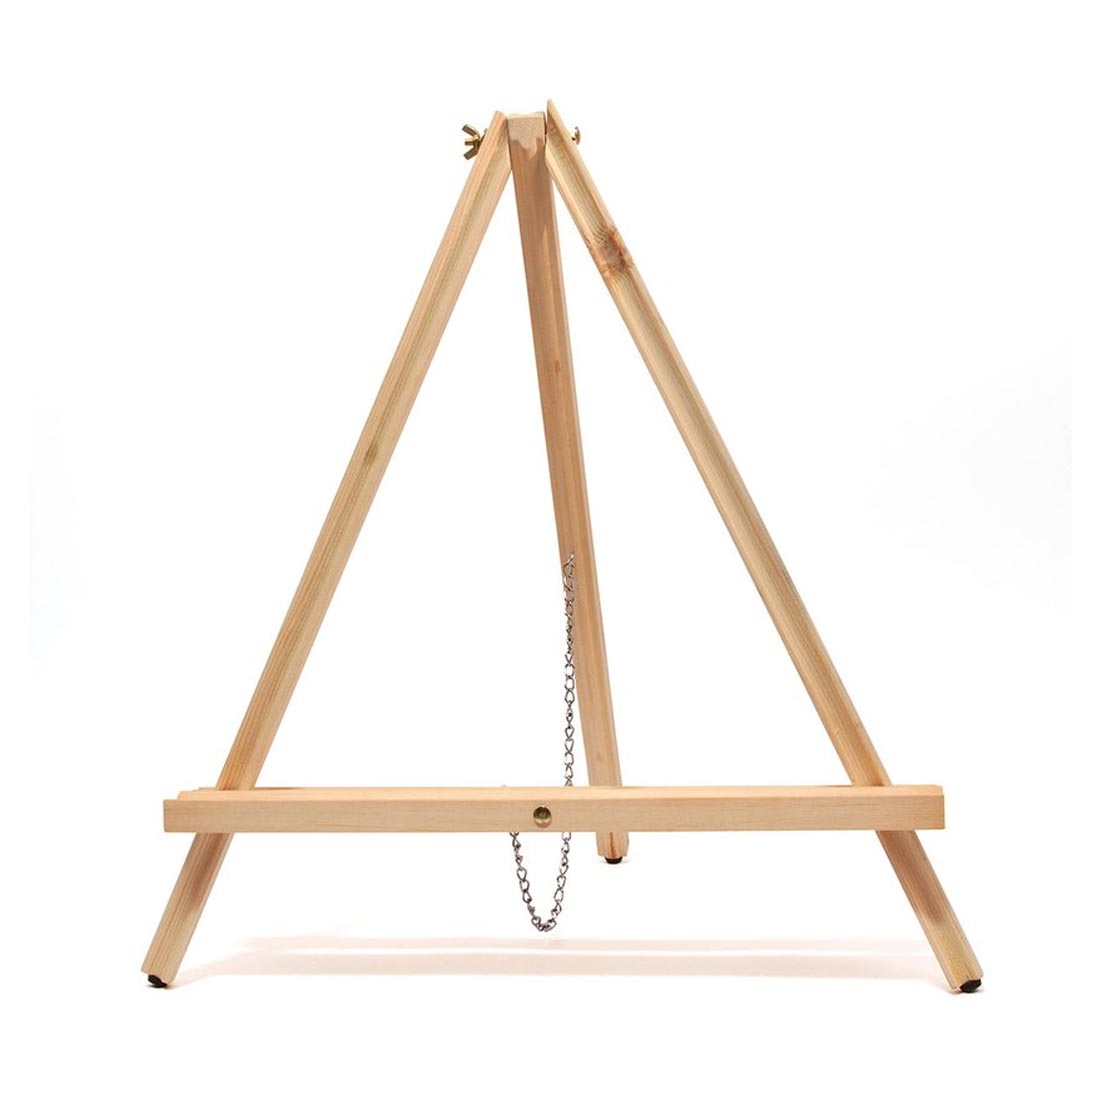 Richeson JJ Table Top Easel